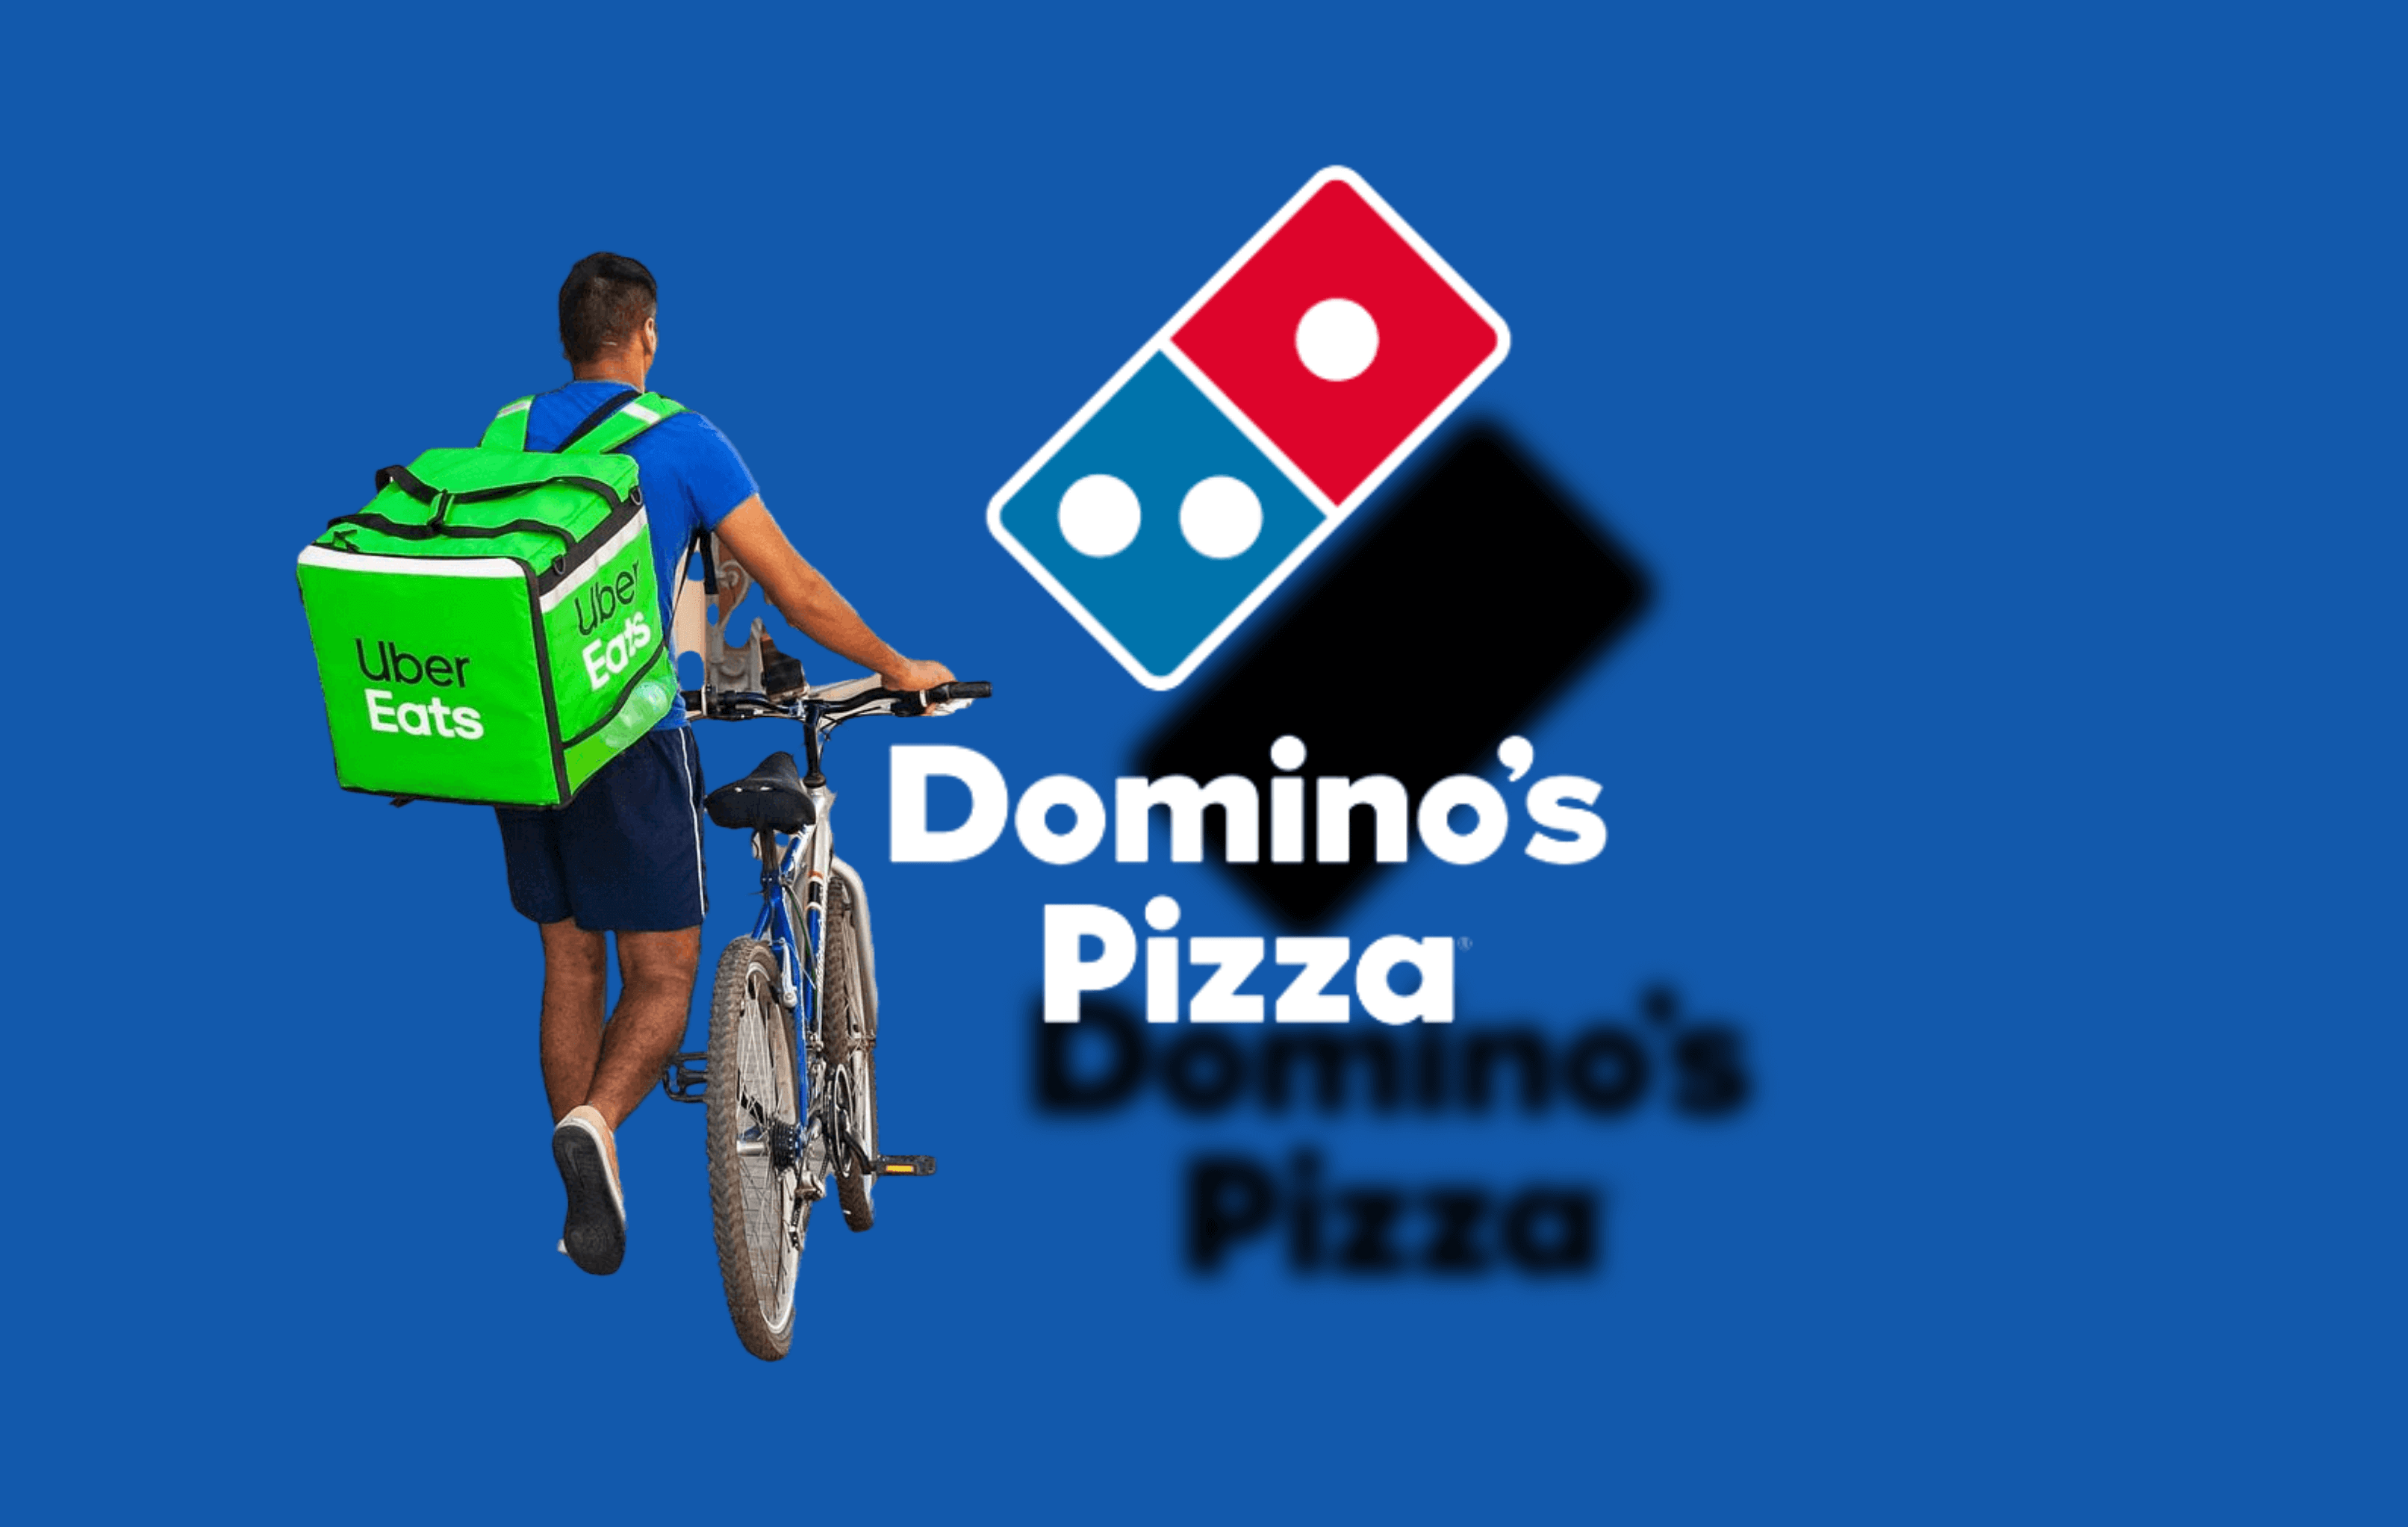 Dominos DPZ Stock Trading News Performance - Q2 23 Reports